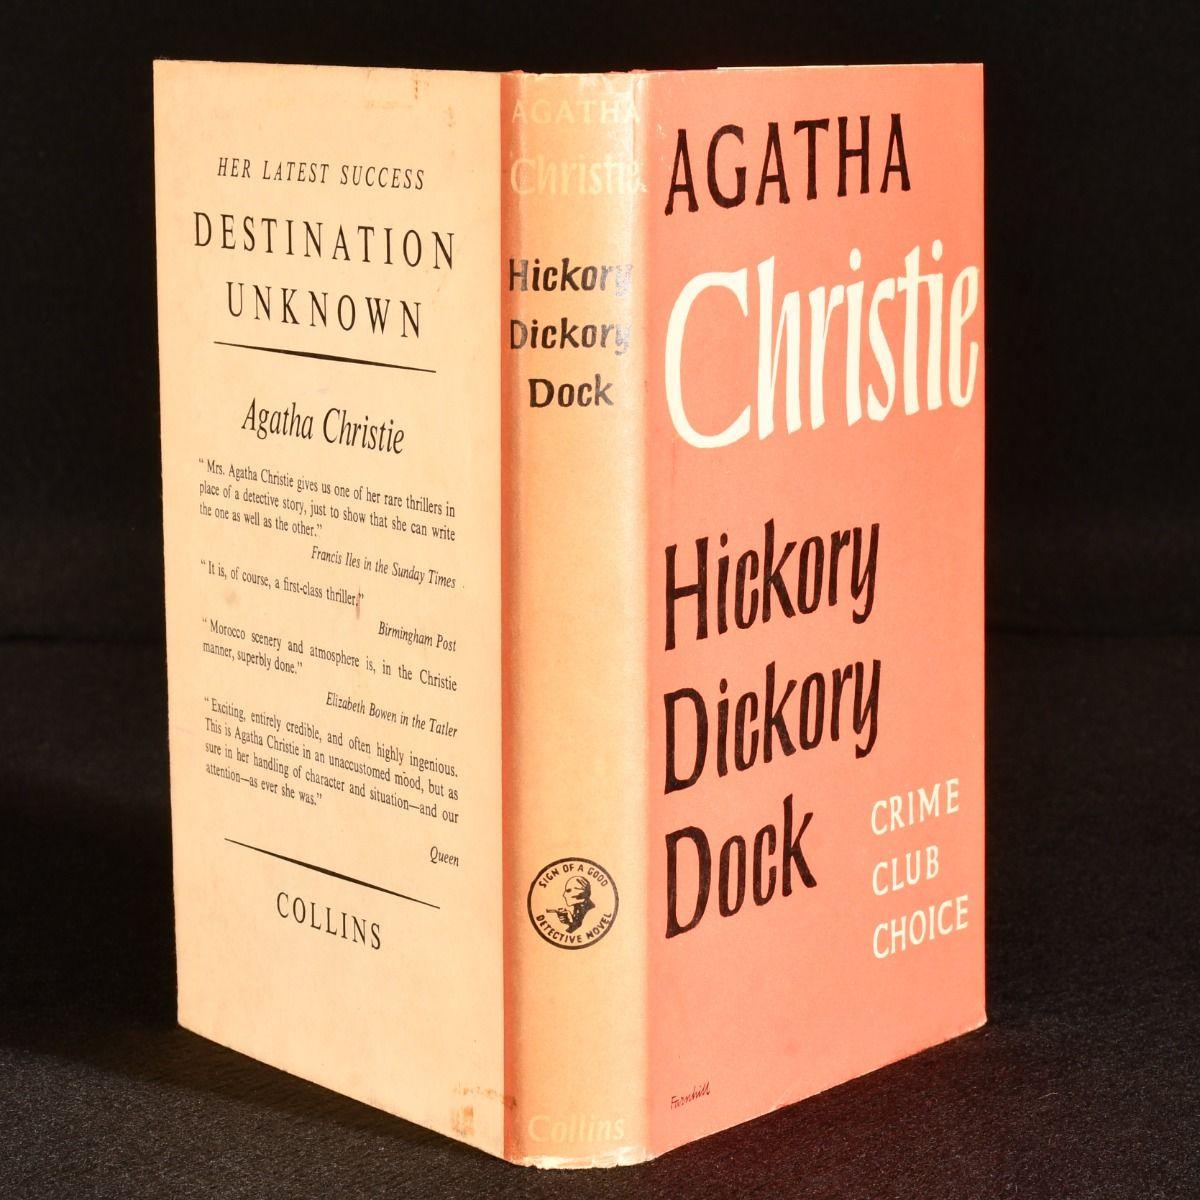 A vanishingly scarce to see signed first edition of this classic Poirot tale.

The first edition, first impression, with no other impressions stated.

Signed and dedicated by the author; 'To Peter [indistinguishable] from Agatha Christie Oct